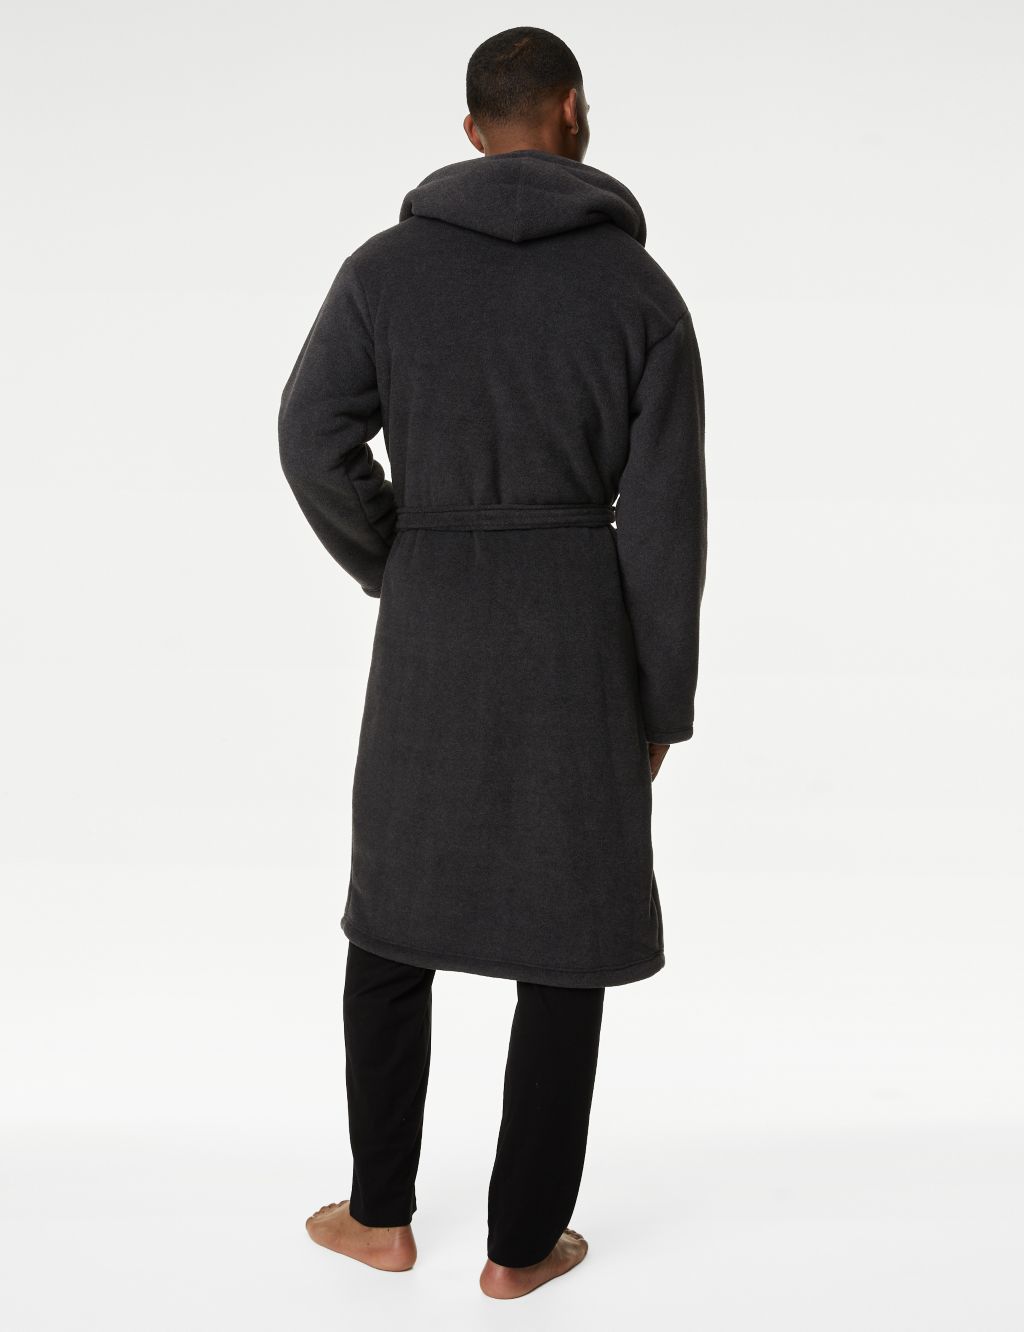 Fleece Supersoft Hooded Dressing Gown image 5